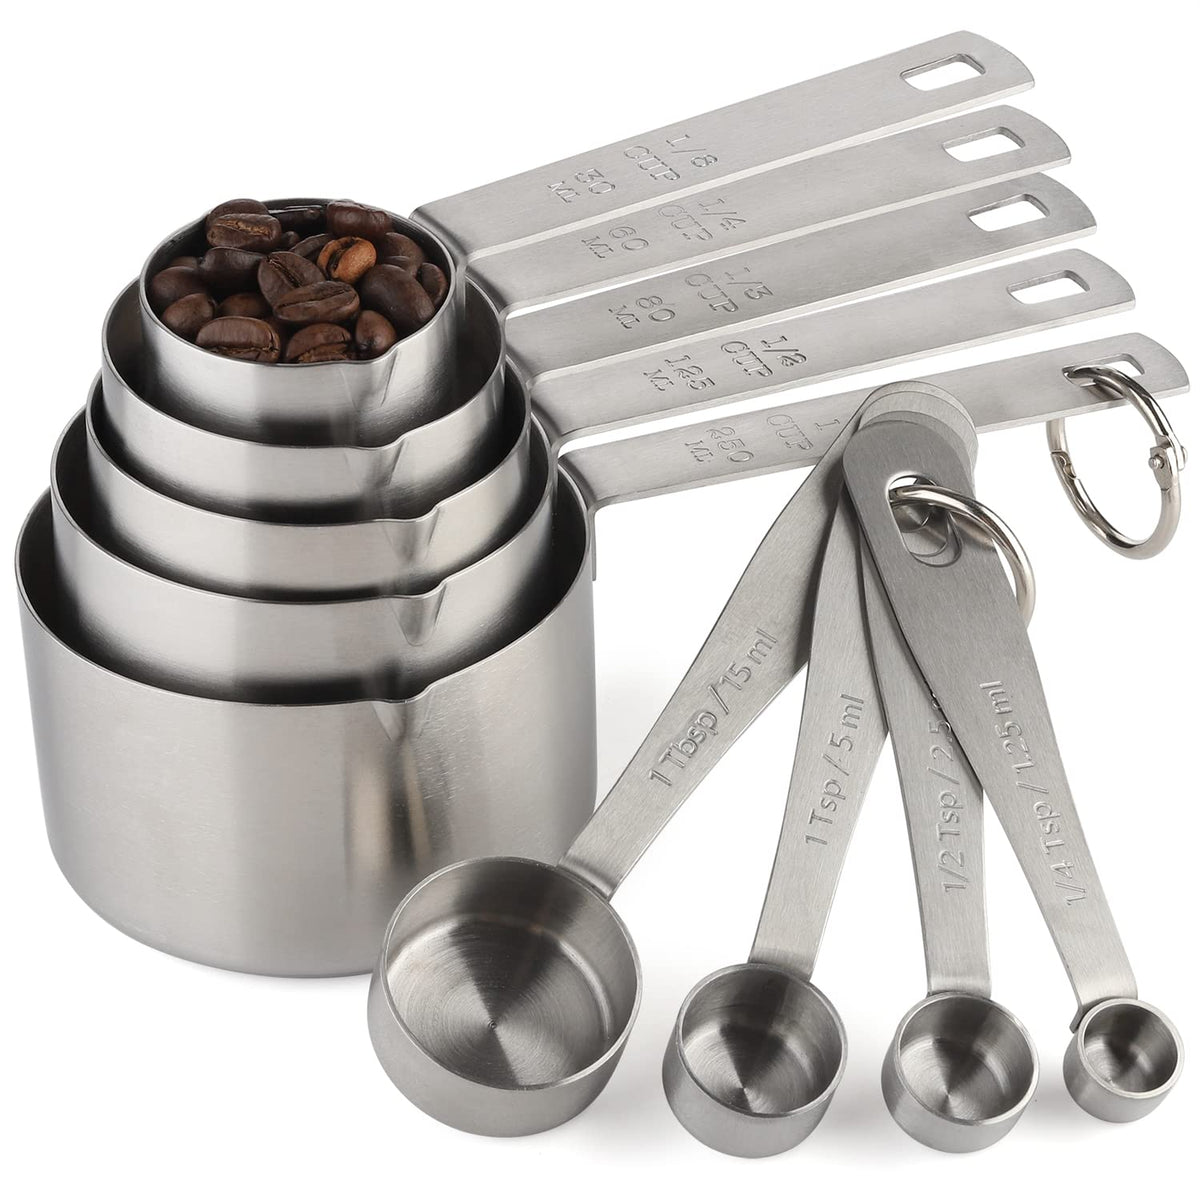 Measuring Cups and Spoons Set Stainless Steel Includes 5 Measuring Cup —  CHIMIYA